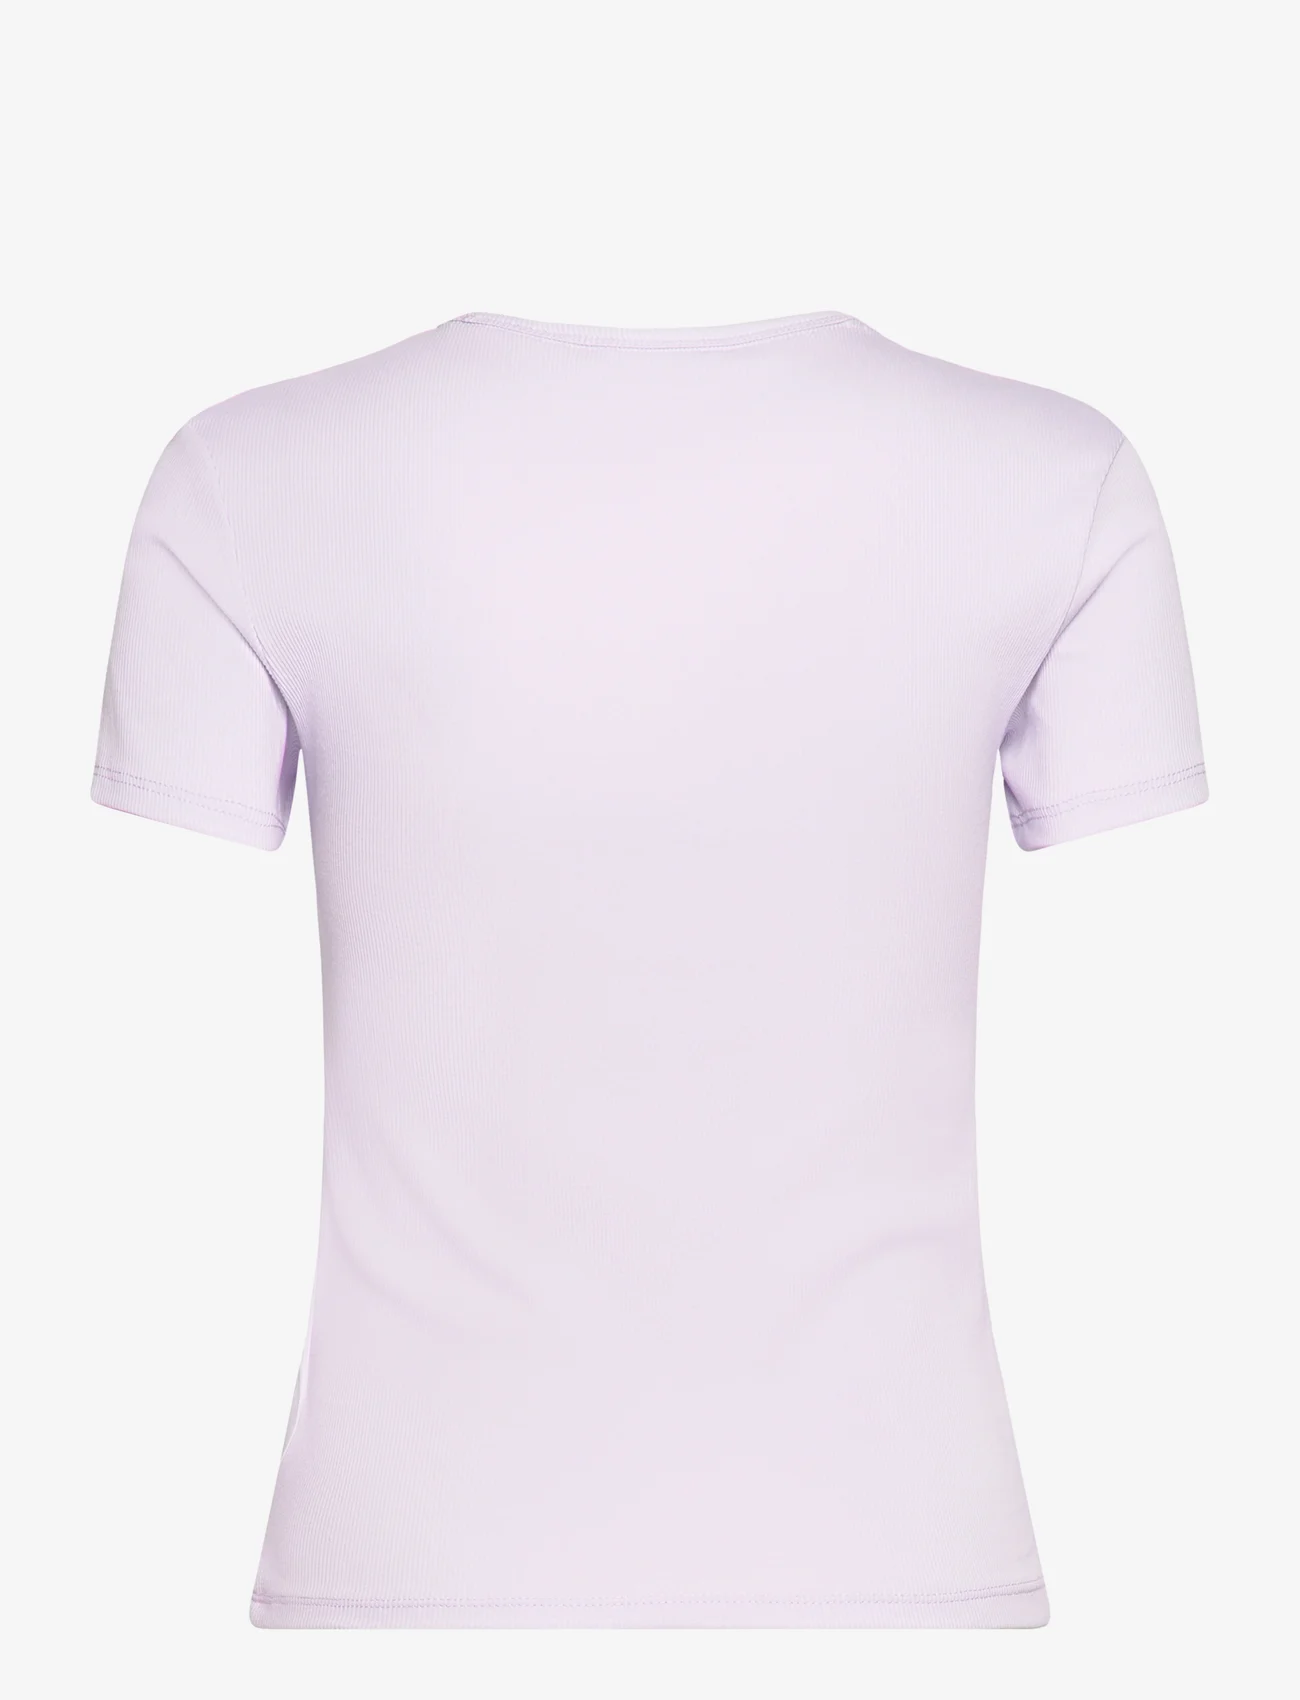 Tommy Jeans - TJW SLIM ESSENTIAL RIB SS EXT - lowest prices - lavender flower - 1